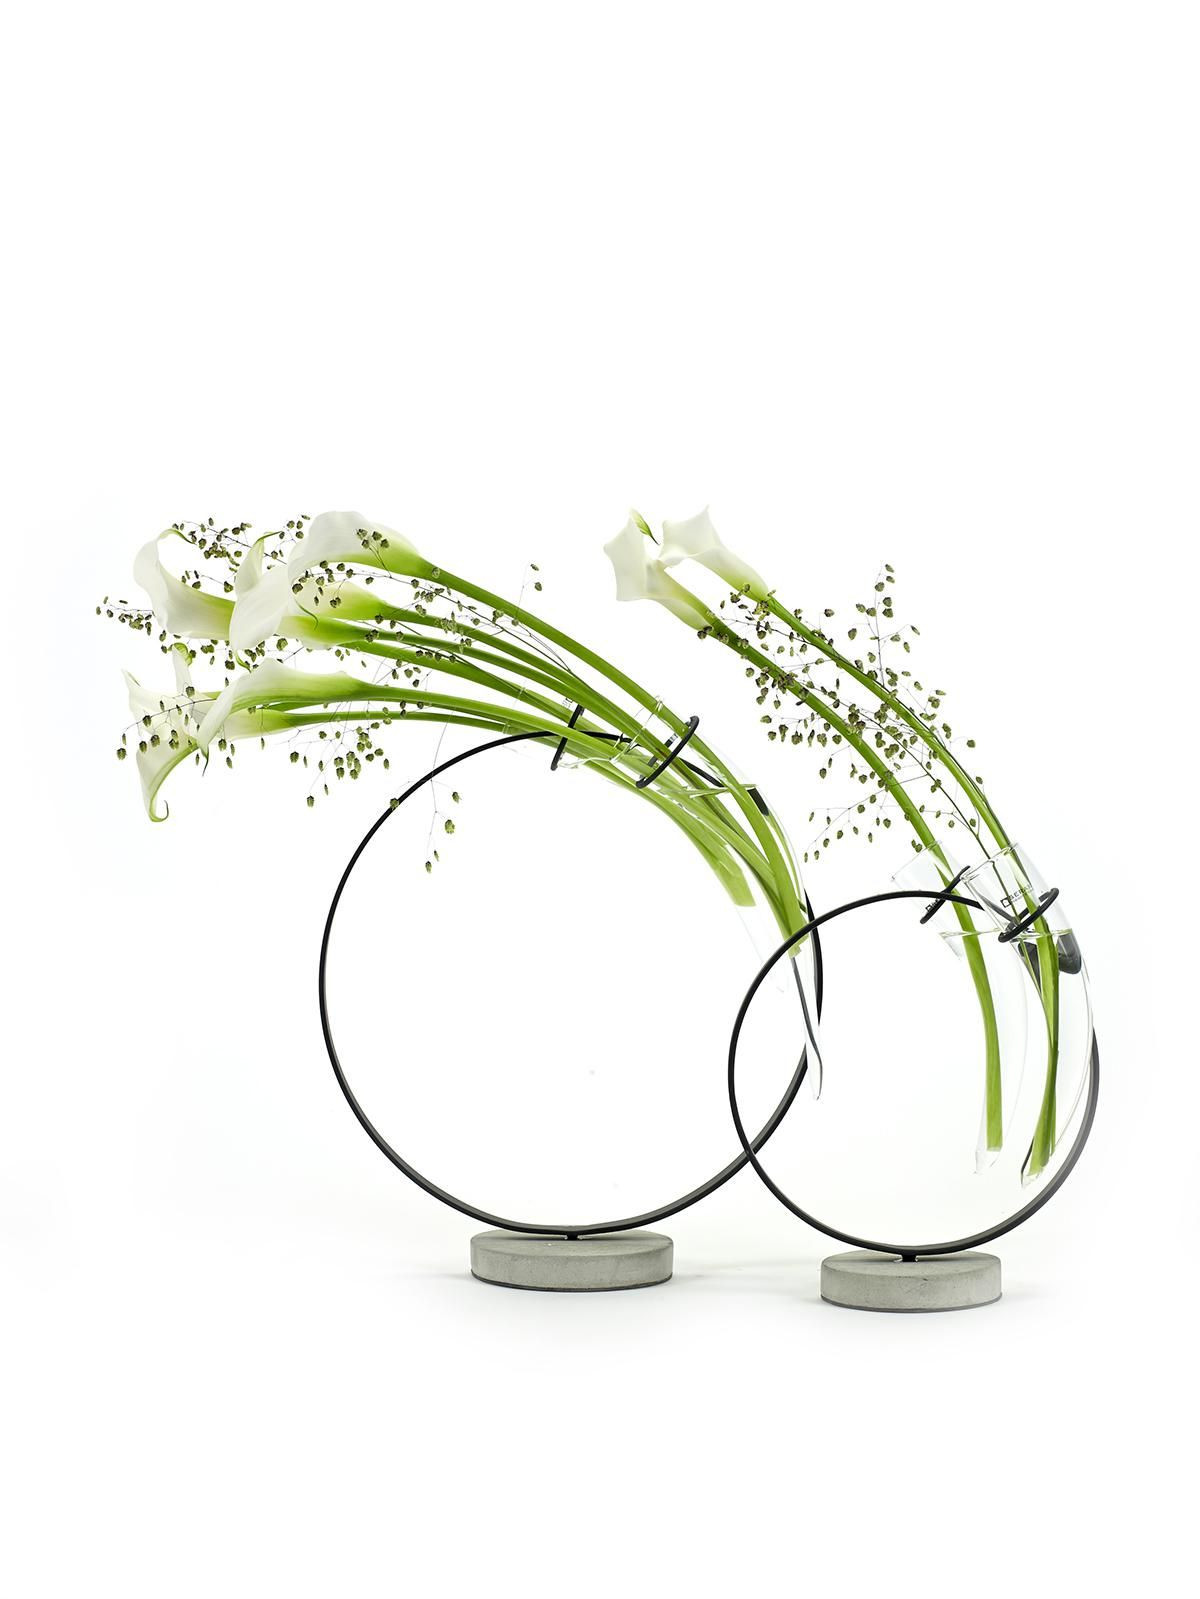 10 Stylish Flower Vase Stand Design 2024 free download flower vase stand design of b7215730hs4 flower power pinterest ikebana flower and flowers with plant stands ac2b7 art floral ac2b7 b7215730hs4